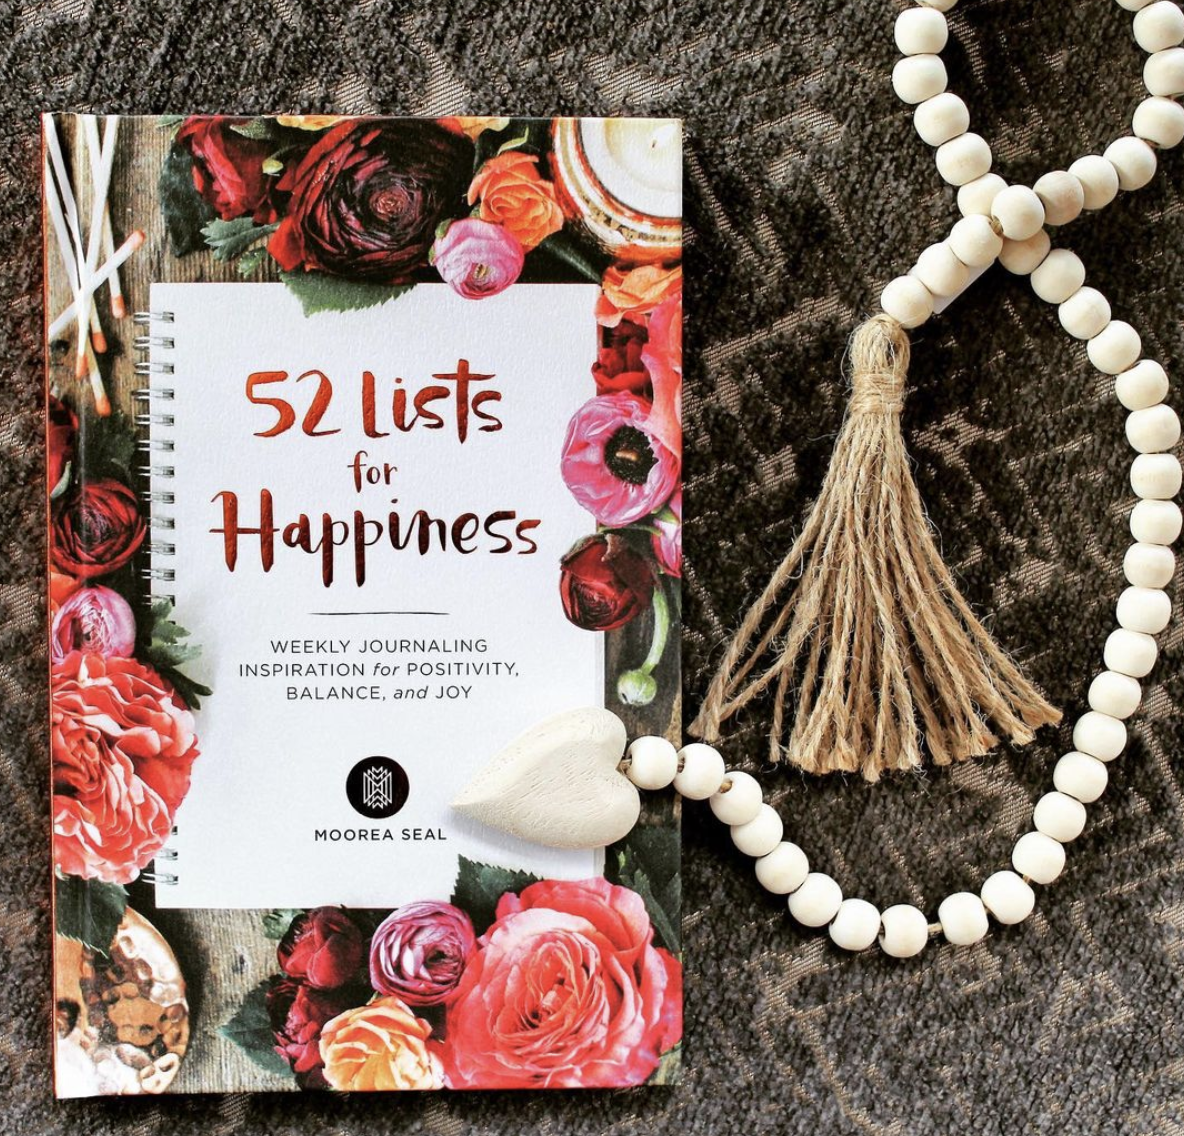 52 Lists for Happiness: Weekly Journaling Book by Moorea Seal